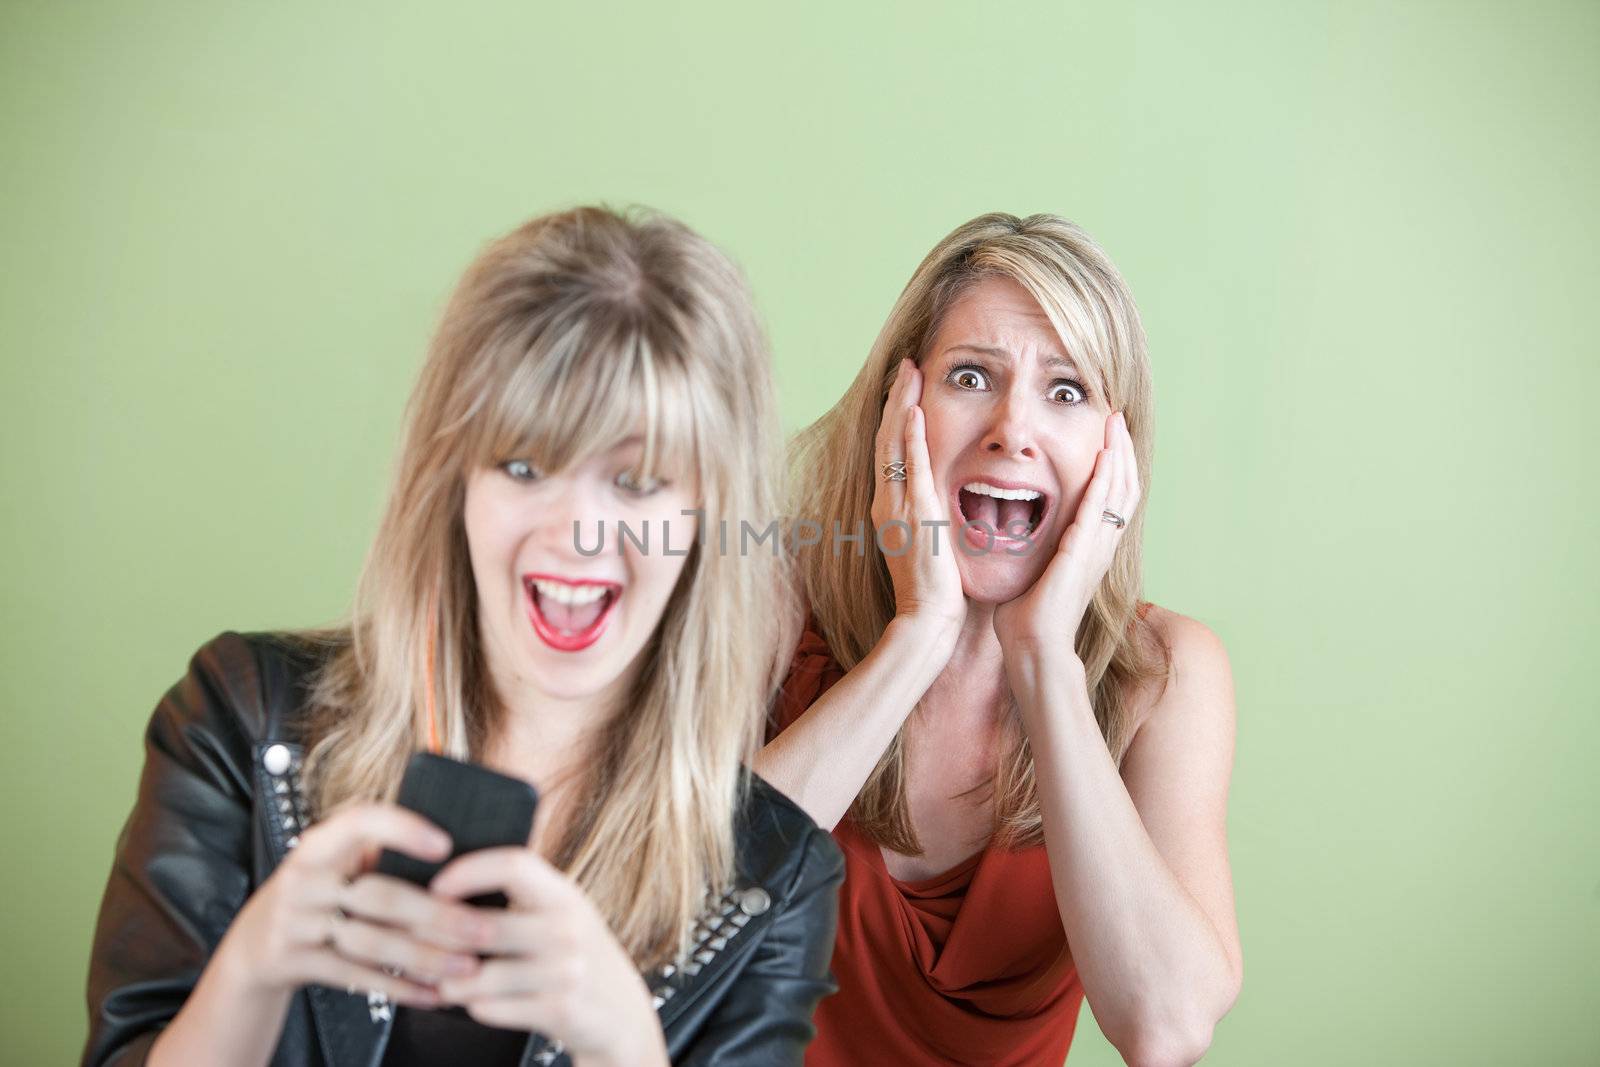 Excited daughter texting with shocked mom behind her over green background